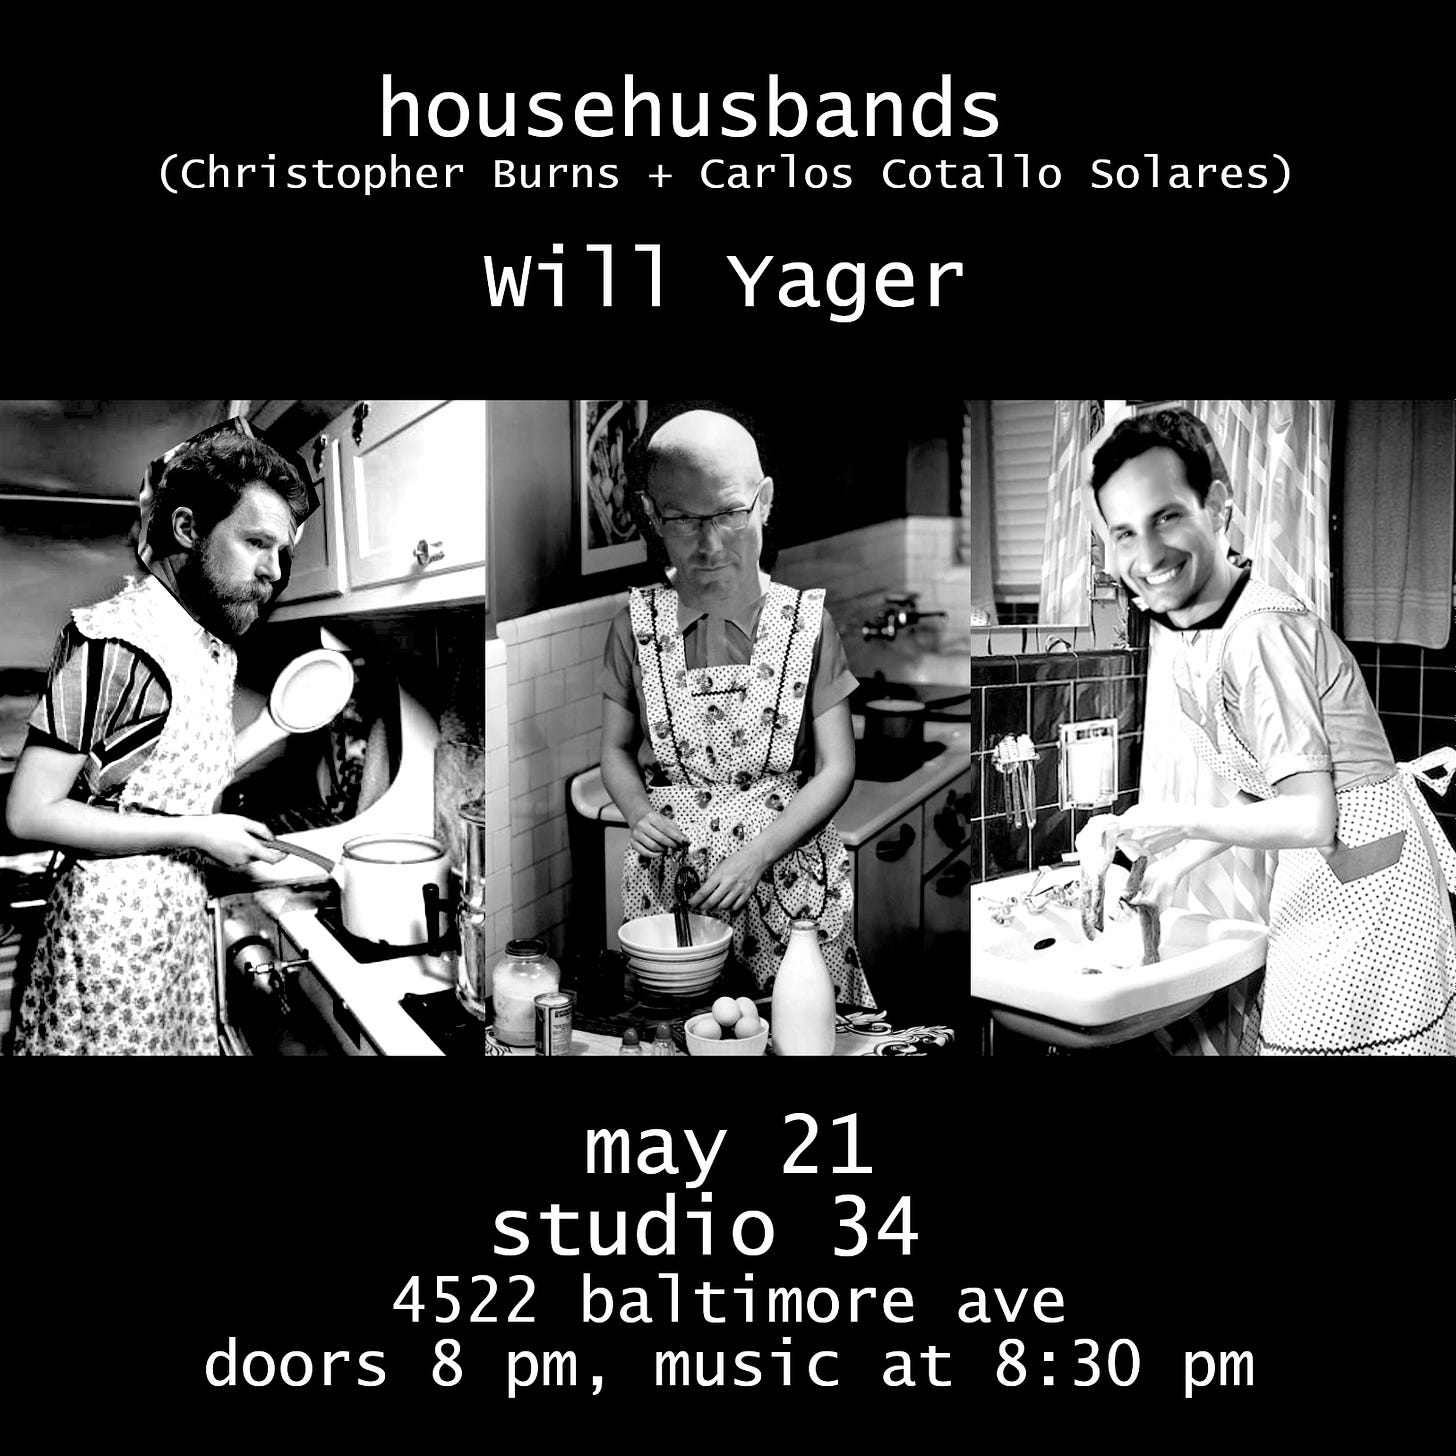 flyer for househusbands + Will Yager, May 21, 8 pm, at Studio 34, 4522 Baltimore Avenue in Philadelphia